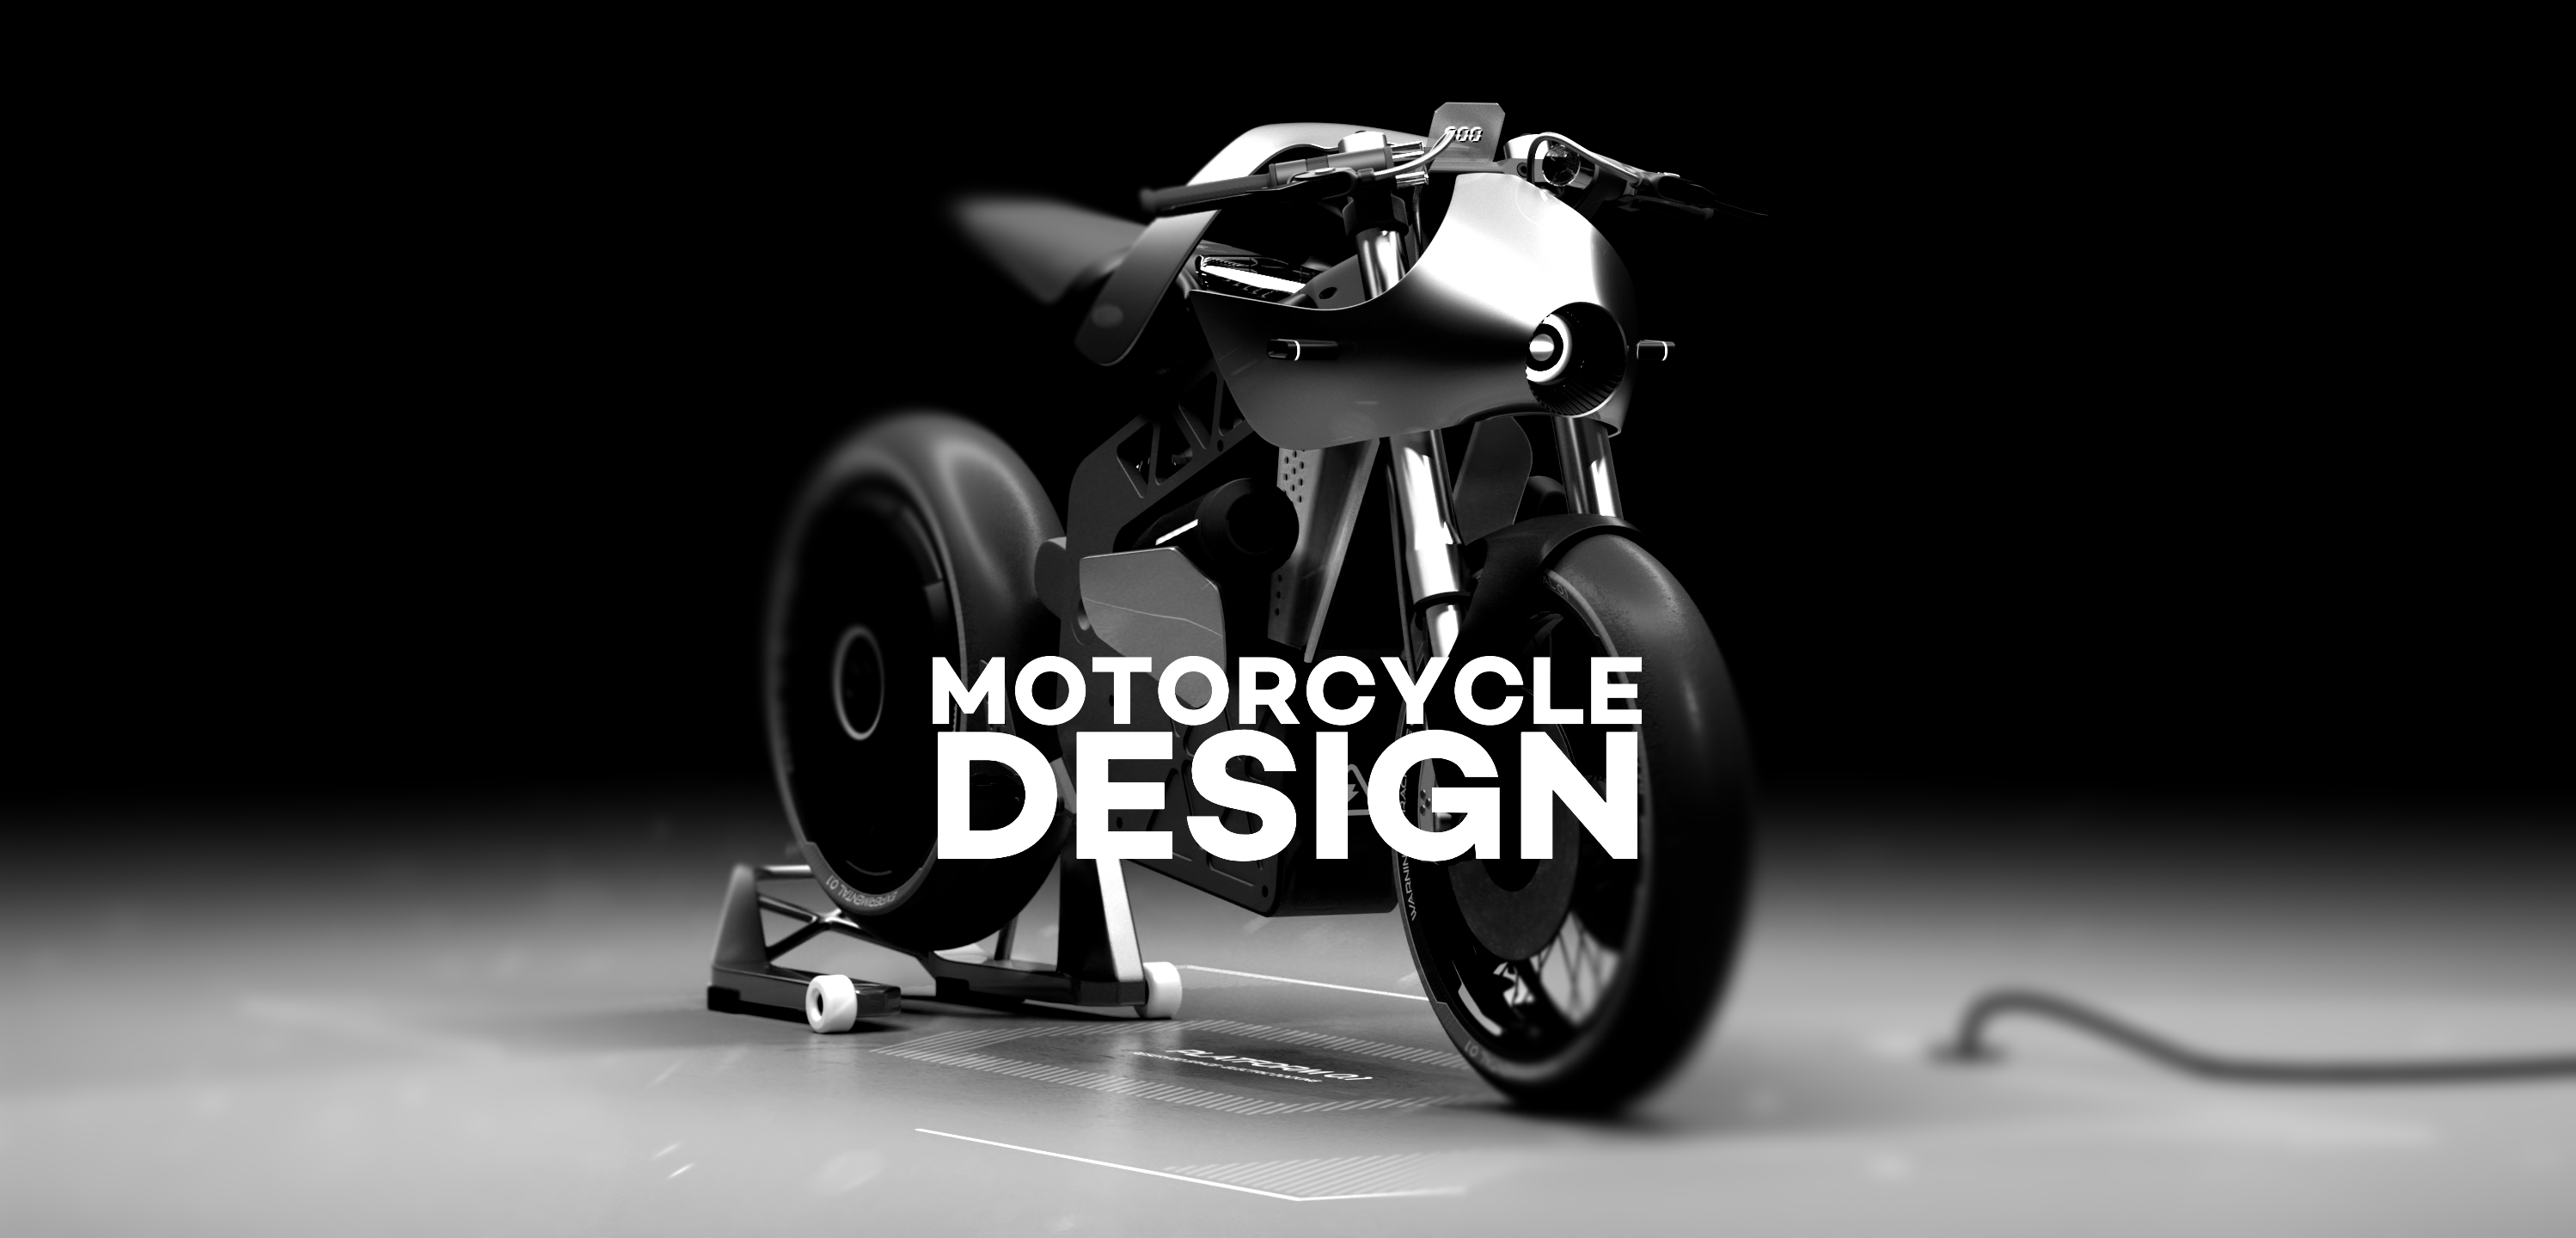 Motorcycle design projects and works